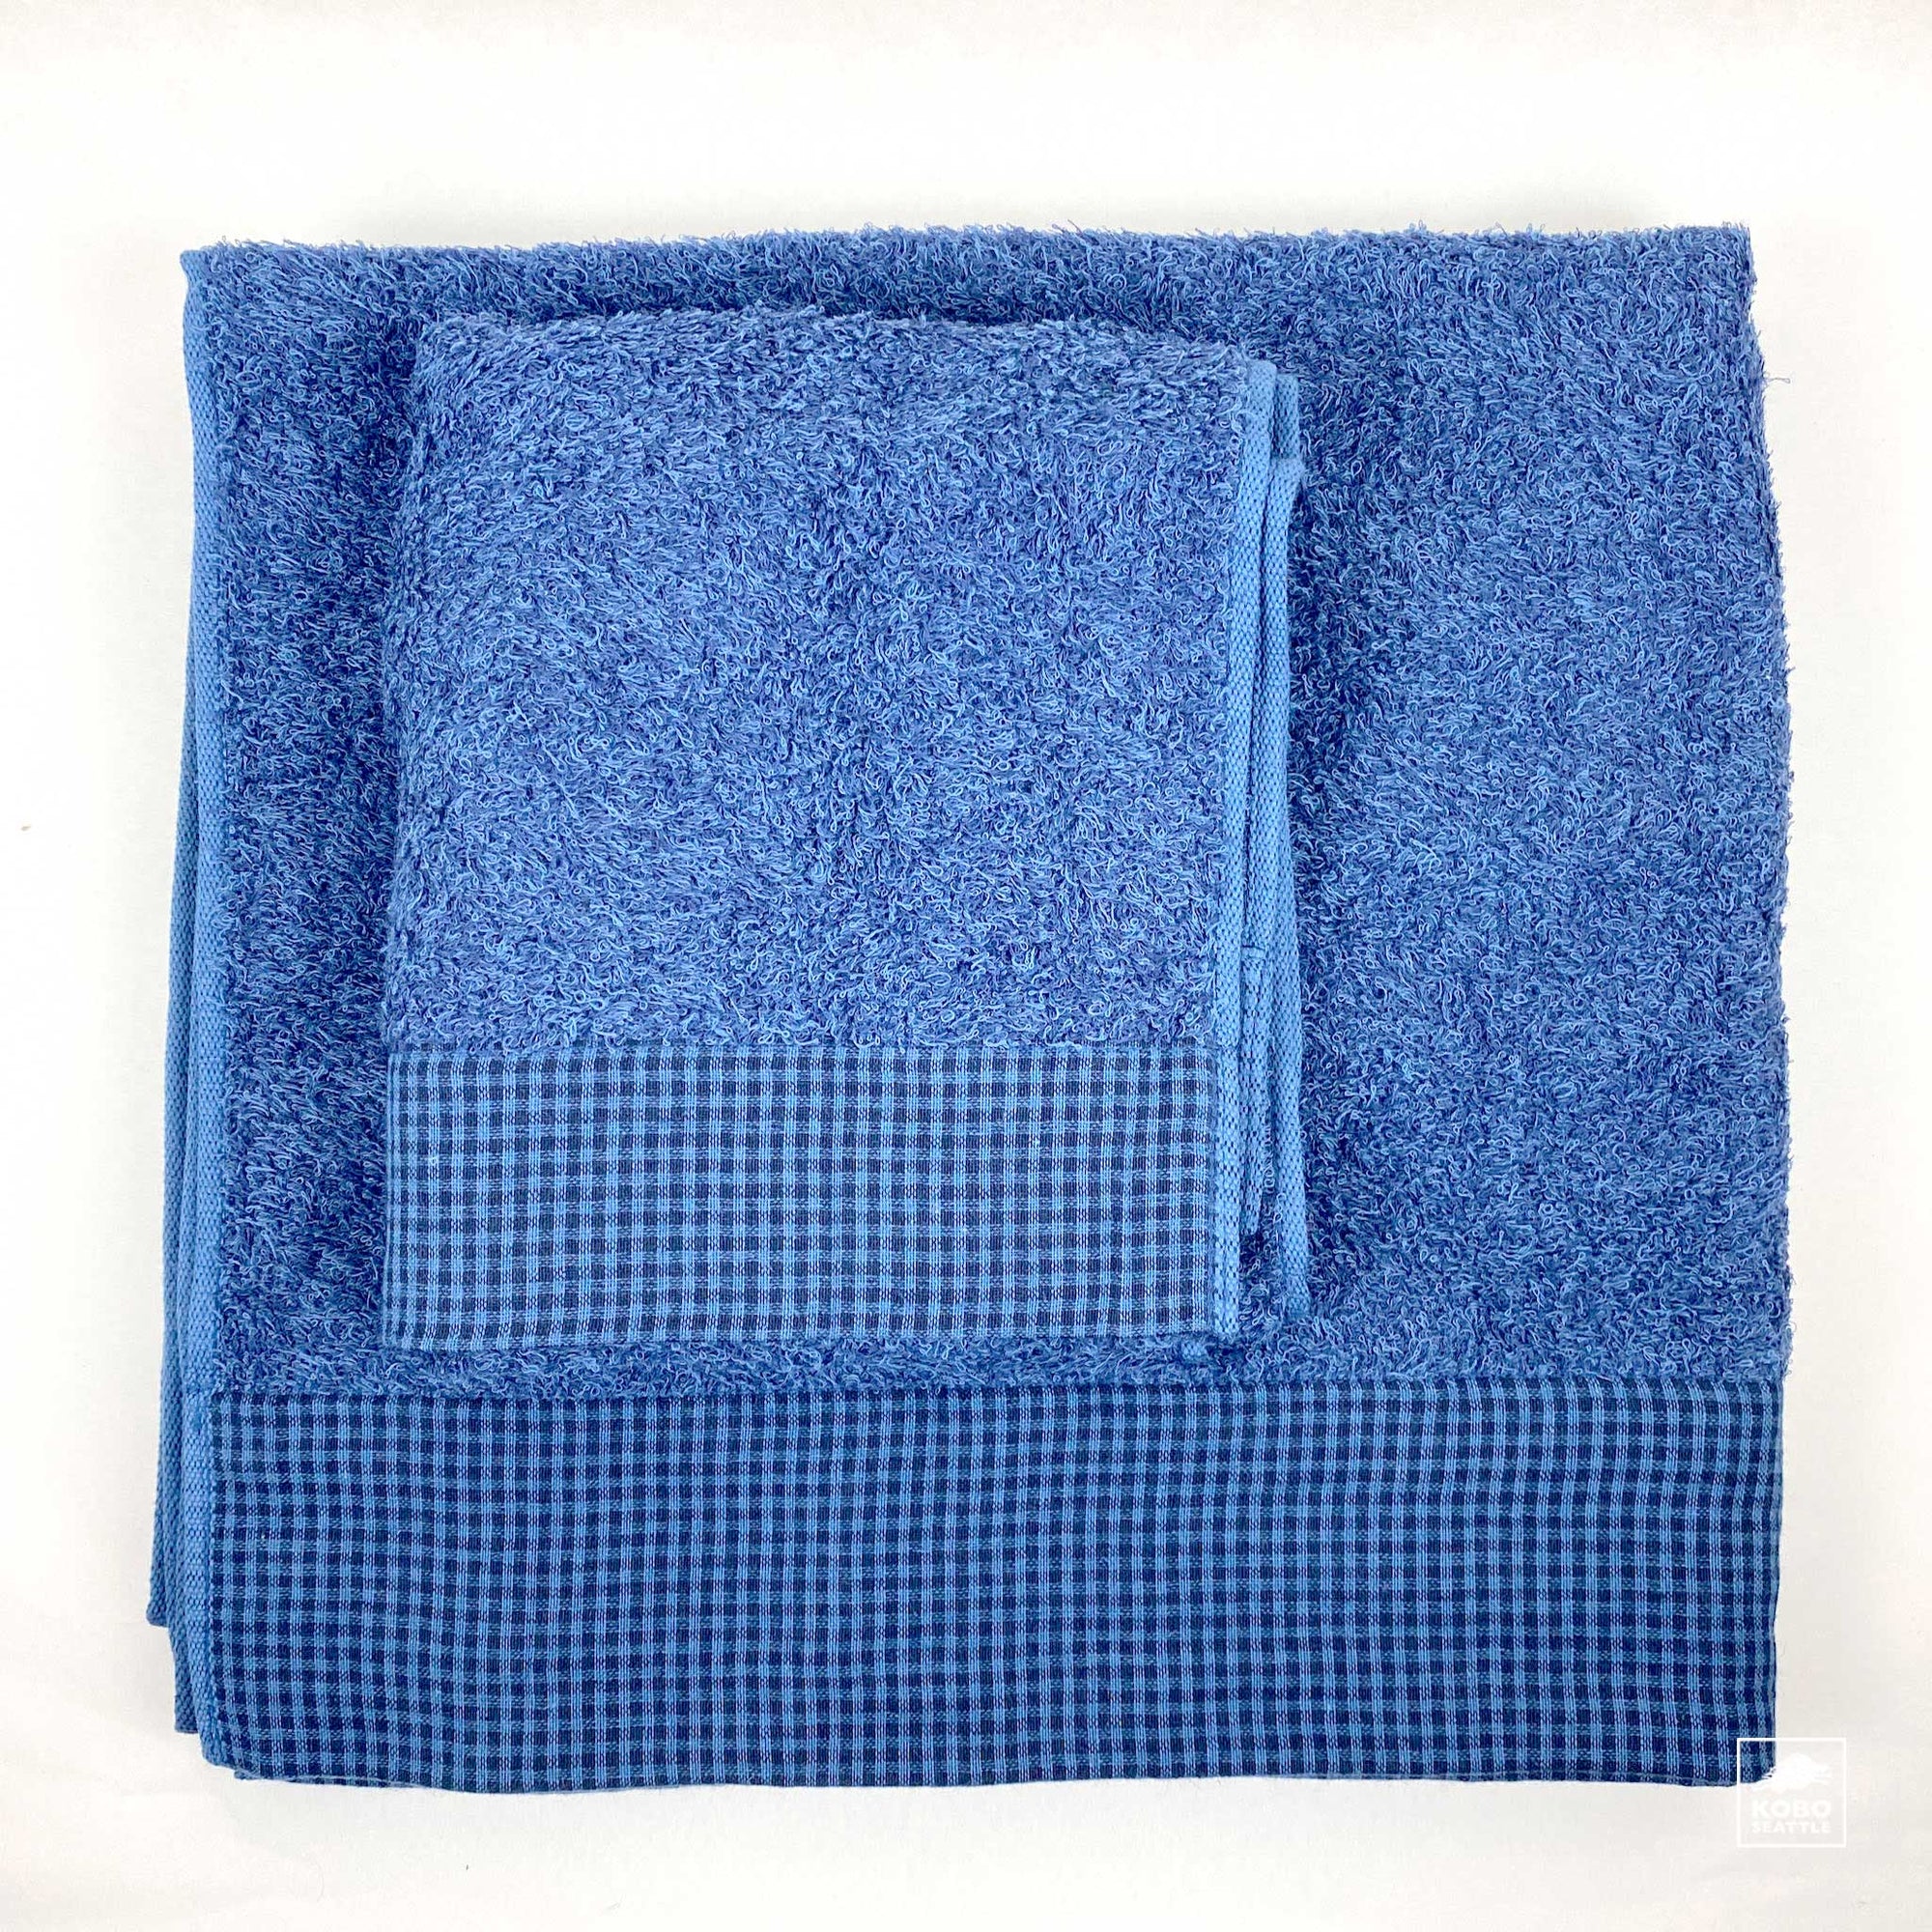 Kontext Japanese Lattice Towels Are the Most Absorbent Towel